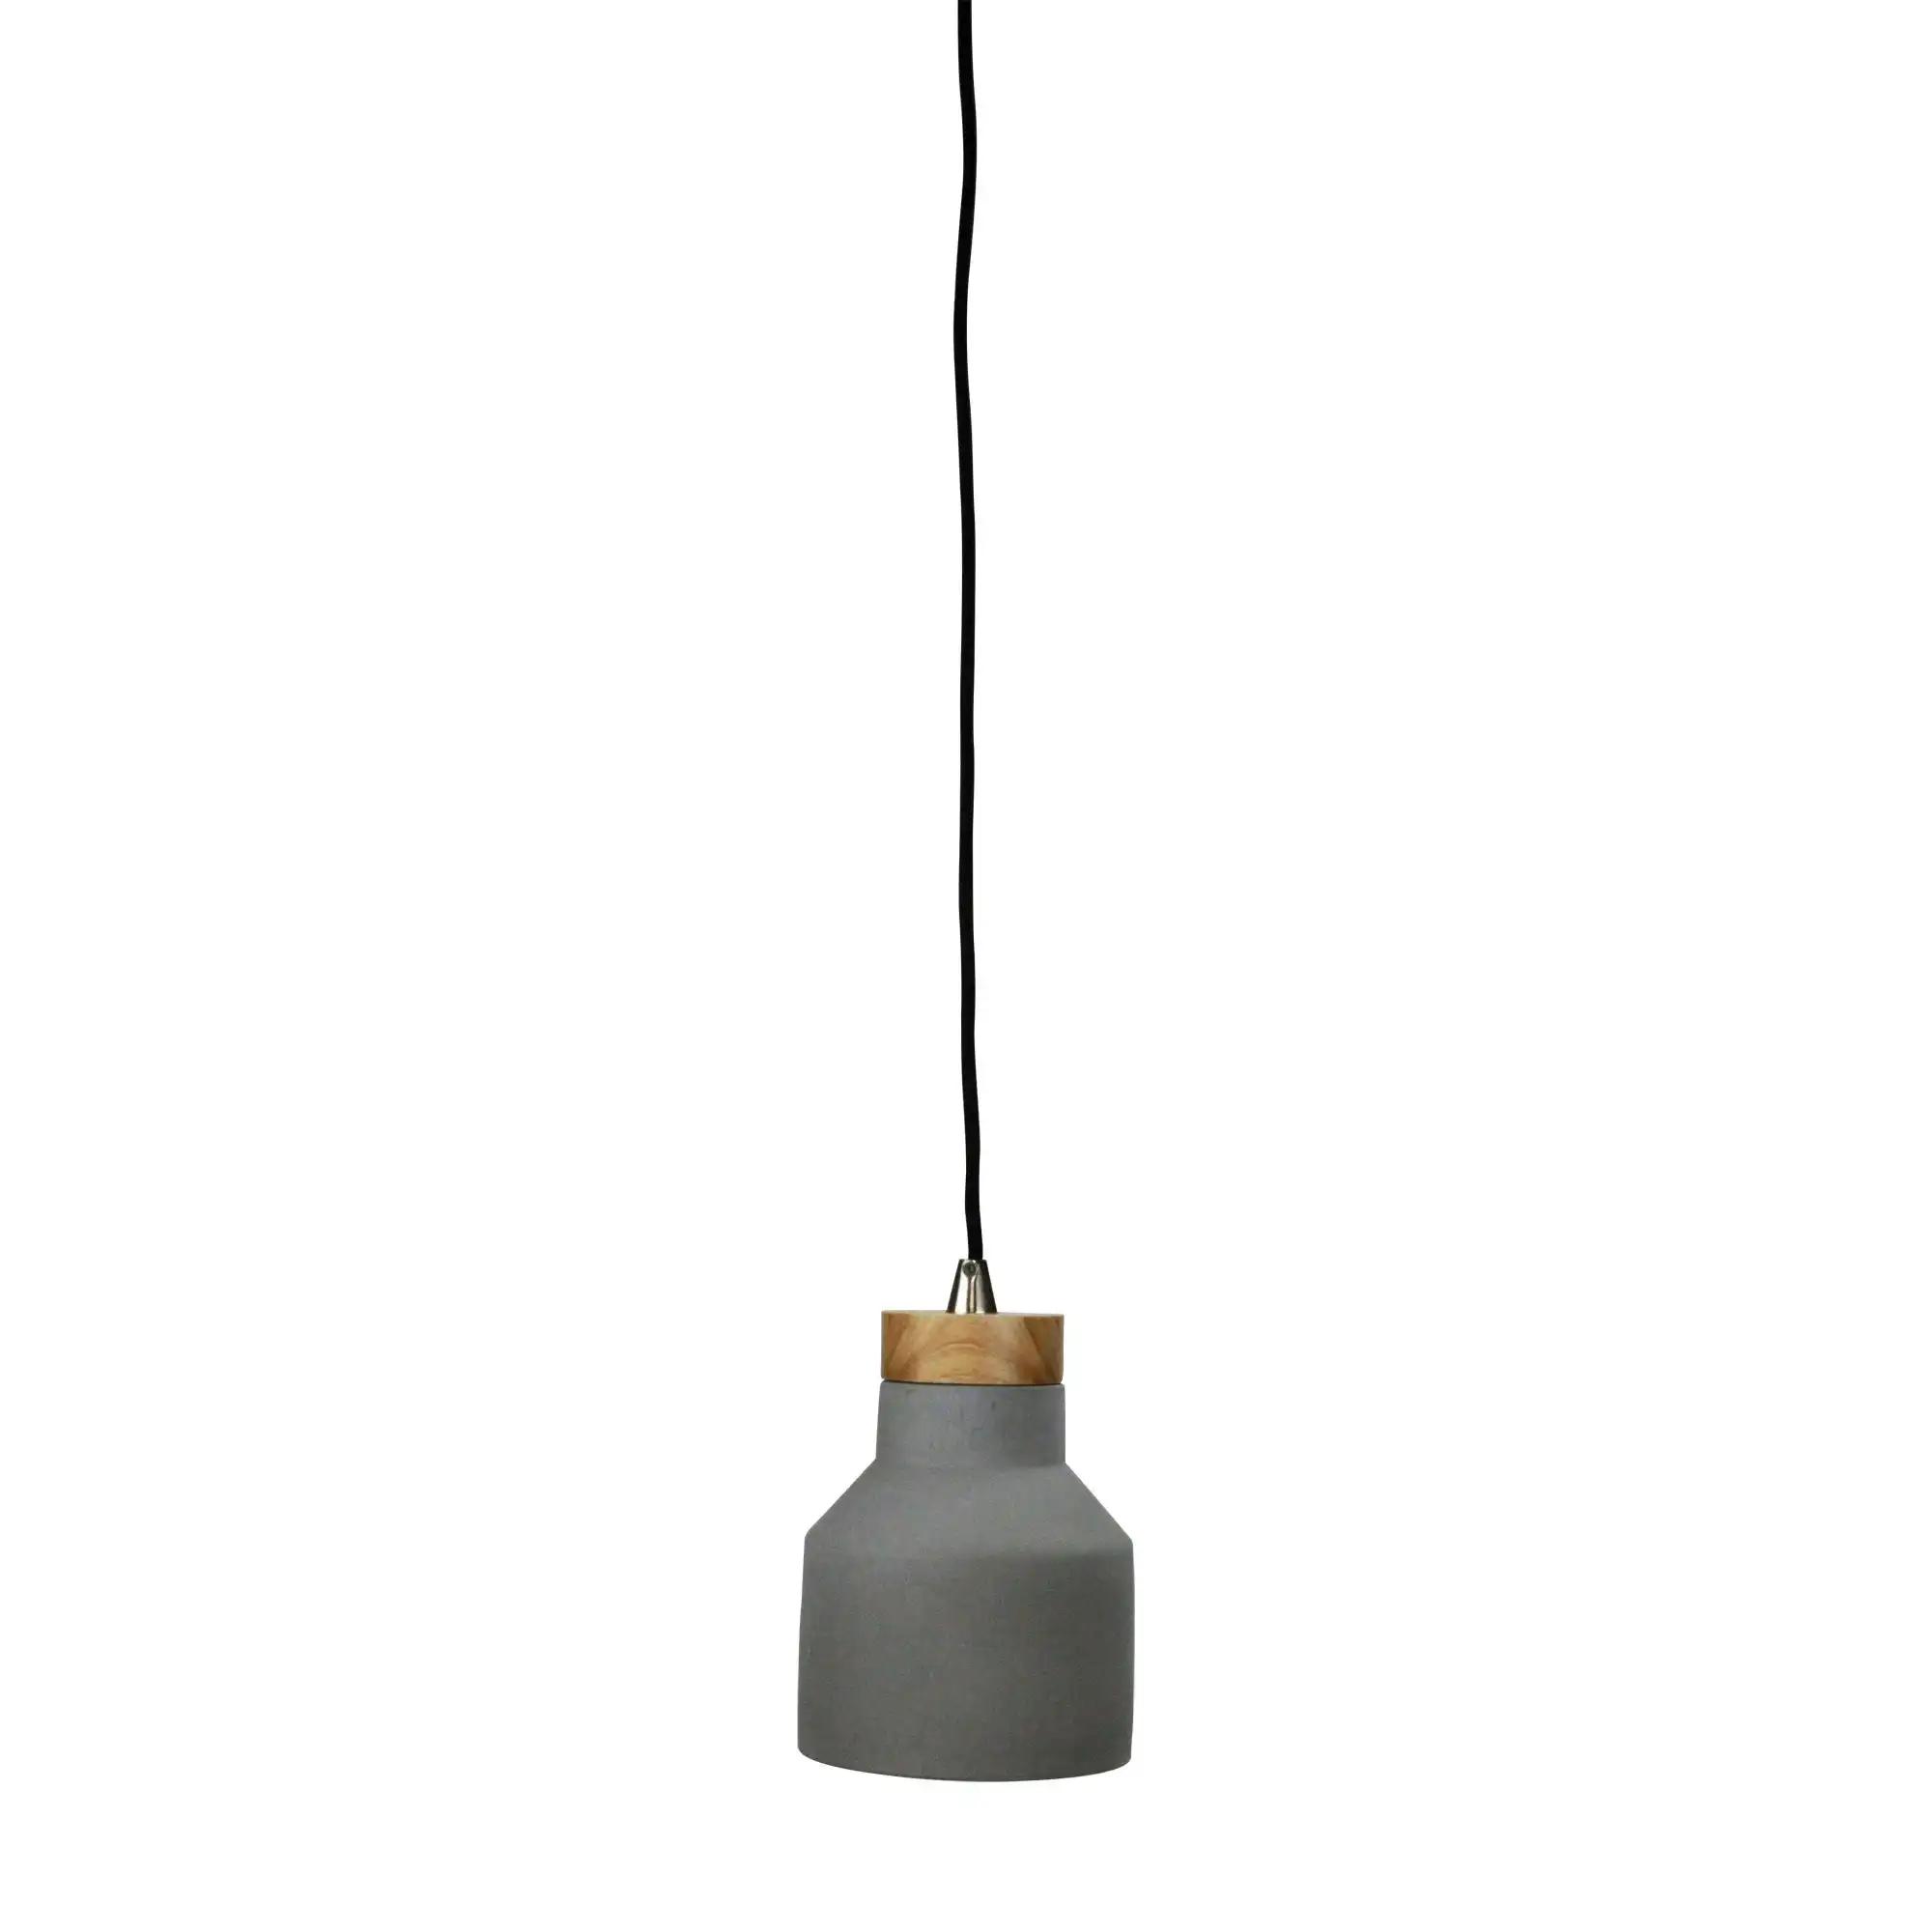 PANTO 1 Urban Style Pendant in Concrete and Timber